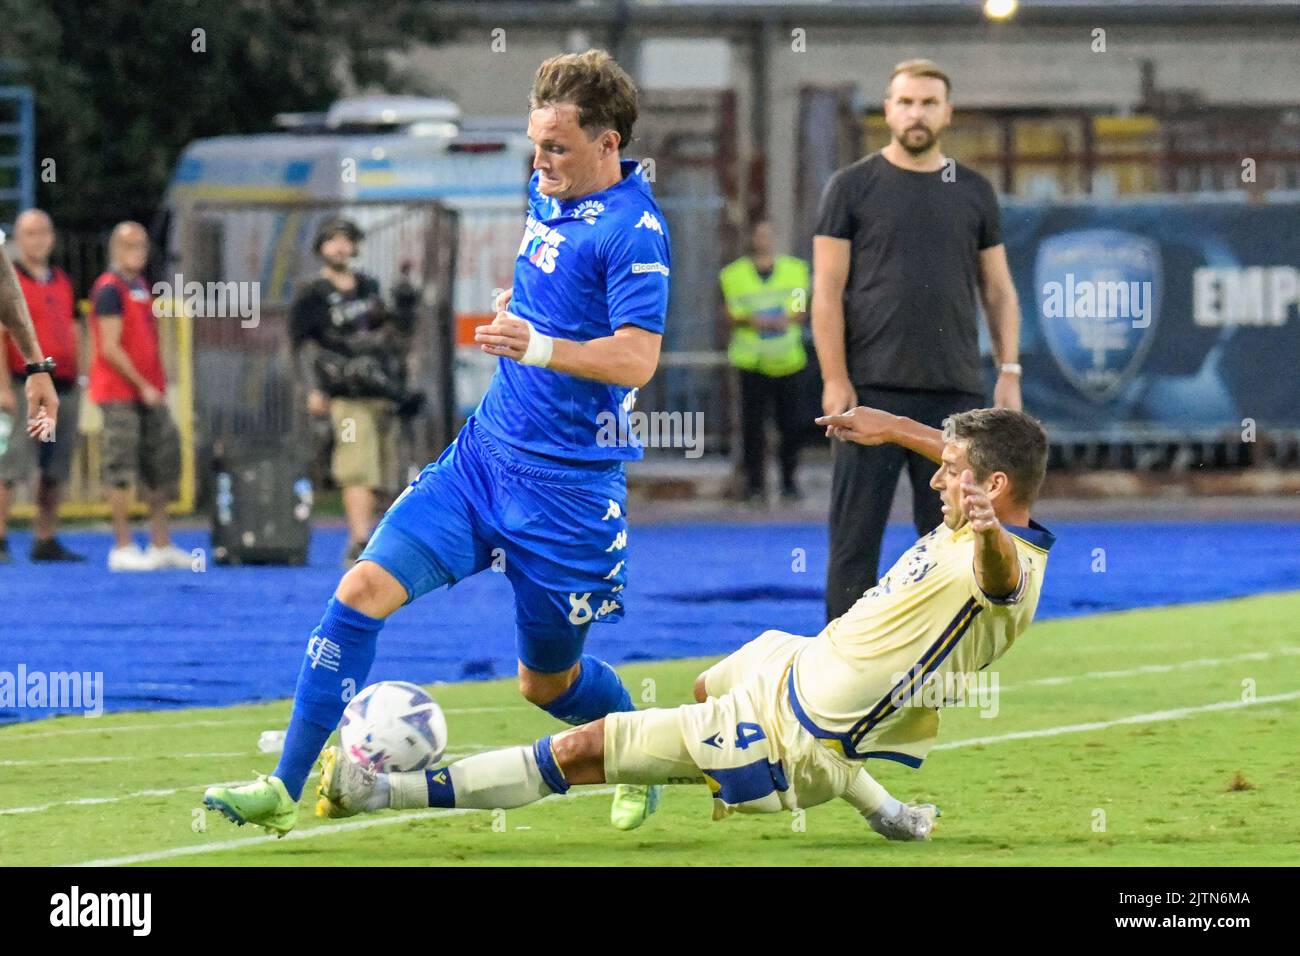 Empoli, Italy. 31st Aug, 2022. Empoliâ&#x80;&#x99;s Liam Henderson is fouled by Hellas Verona's Miguel Pinto Veloso during Empoli FC vs Hellas Verona, italian soccer Serie A match in Empoli, Italy, August 31 2022 Credit: Independent Photo Agency/Alamy Live News Stock Photo